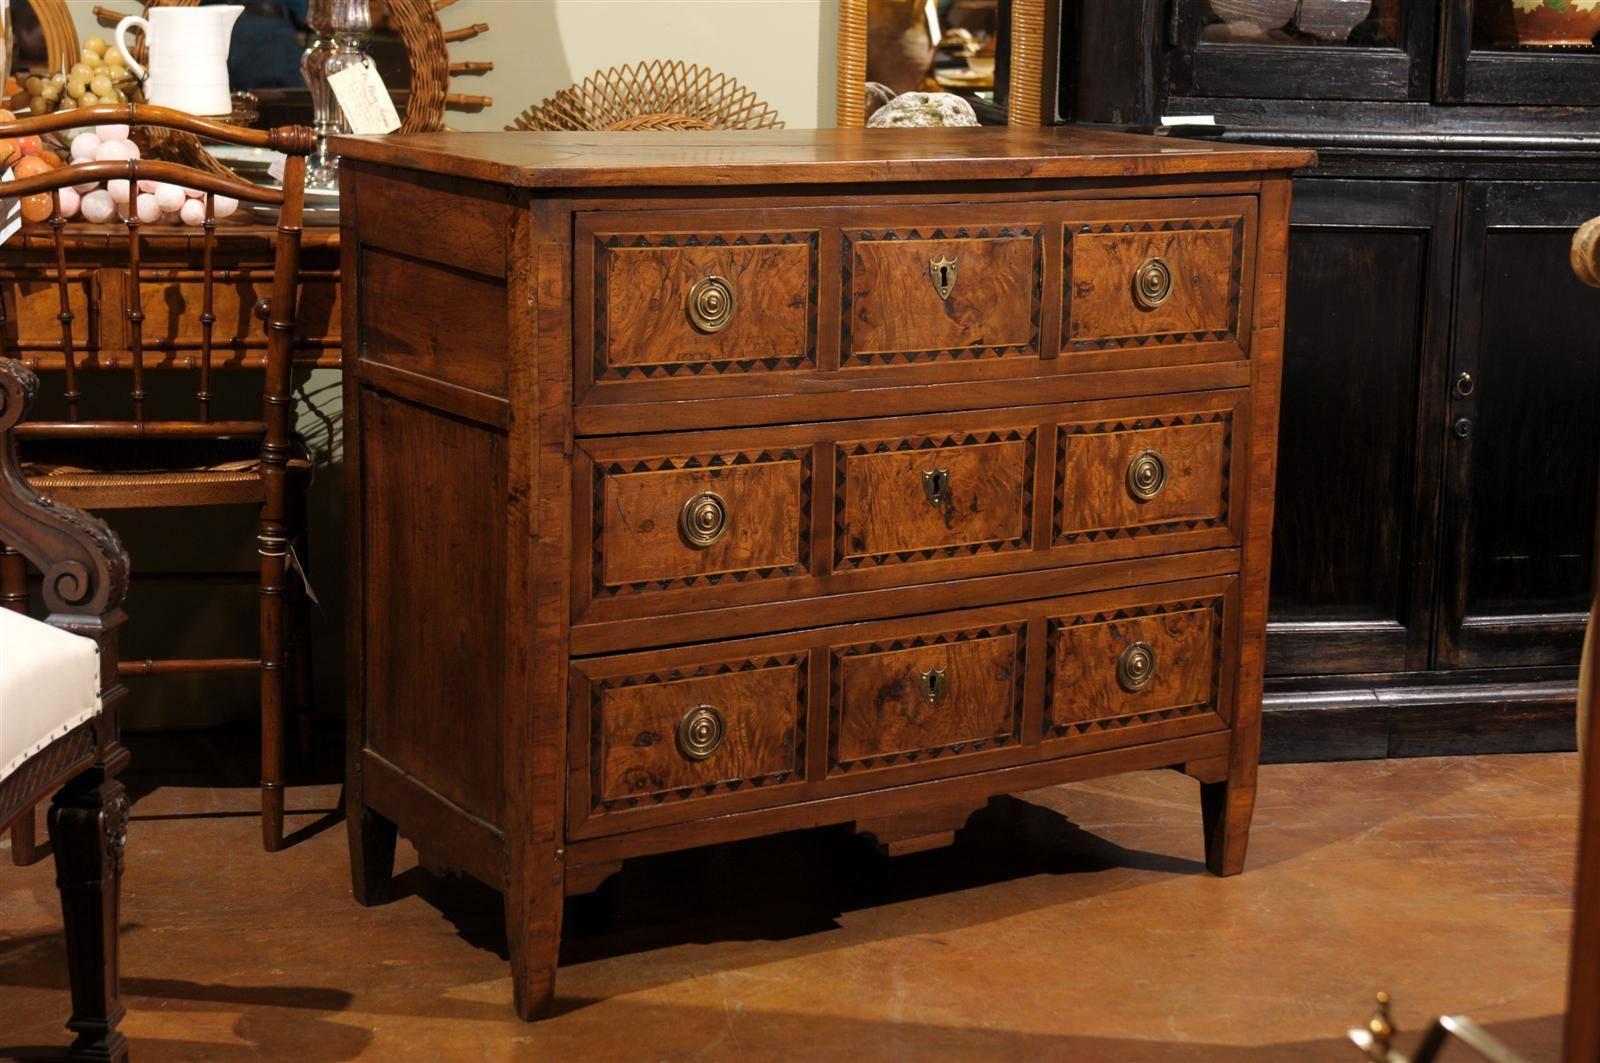 Mid to late 19th century burl walnut commode, the rectangular top surmounting three long drawers, each with inlaid work on three panels, brass ring pulls and escutcheons, all raised on tapering block legs.